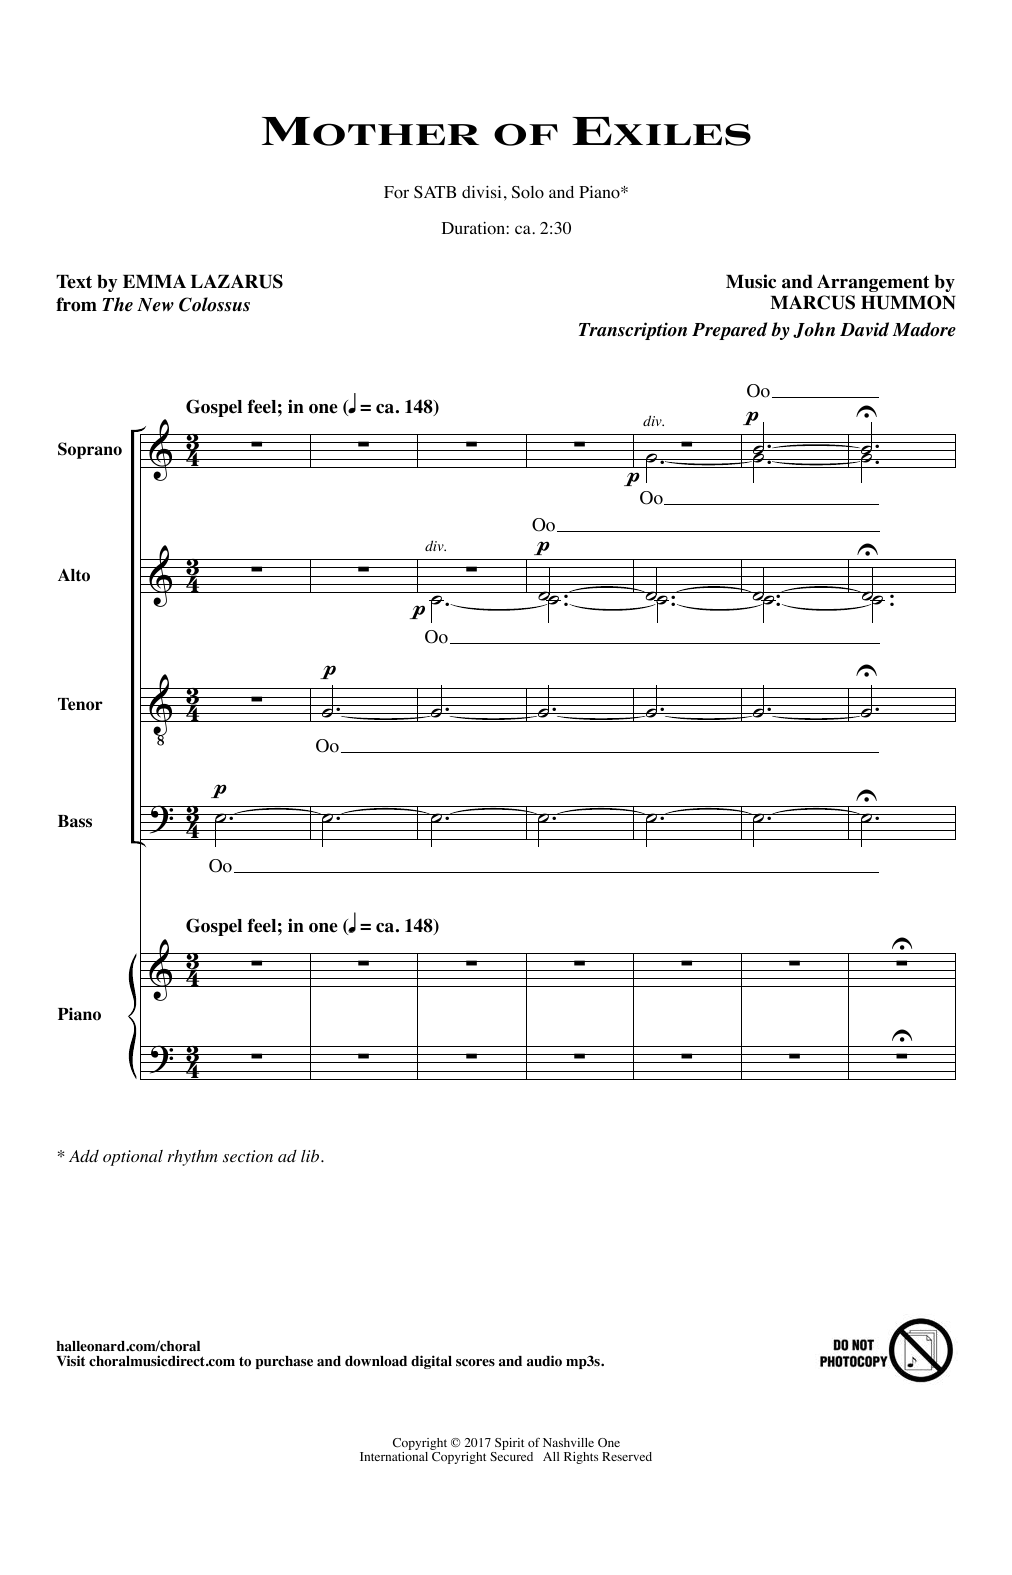 Download Emma Lazarus & Marcus Hummon Mother Of Exiles Sheet Music